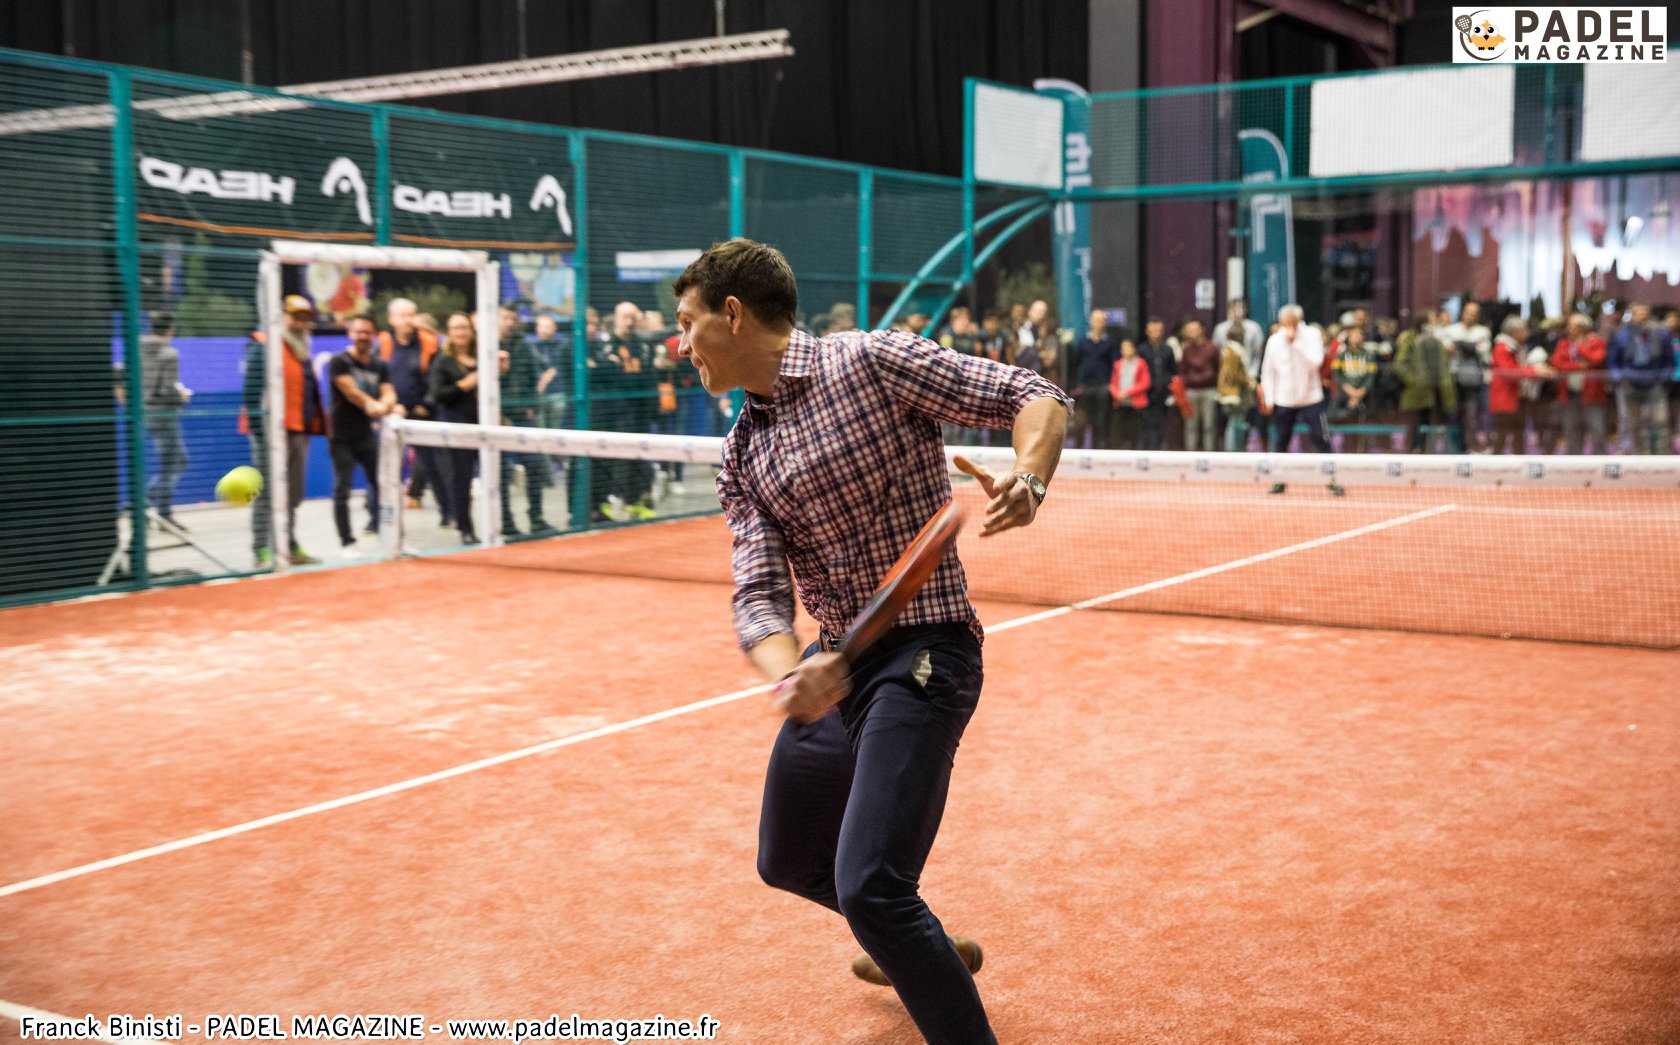 PlayPadel concludes his show of padel